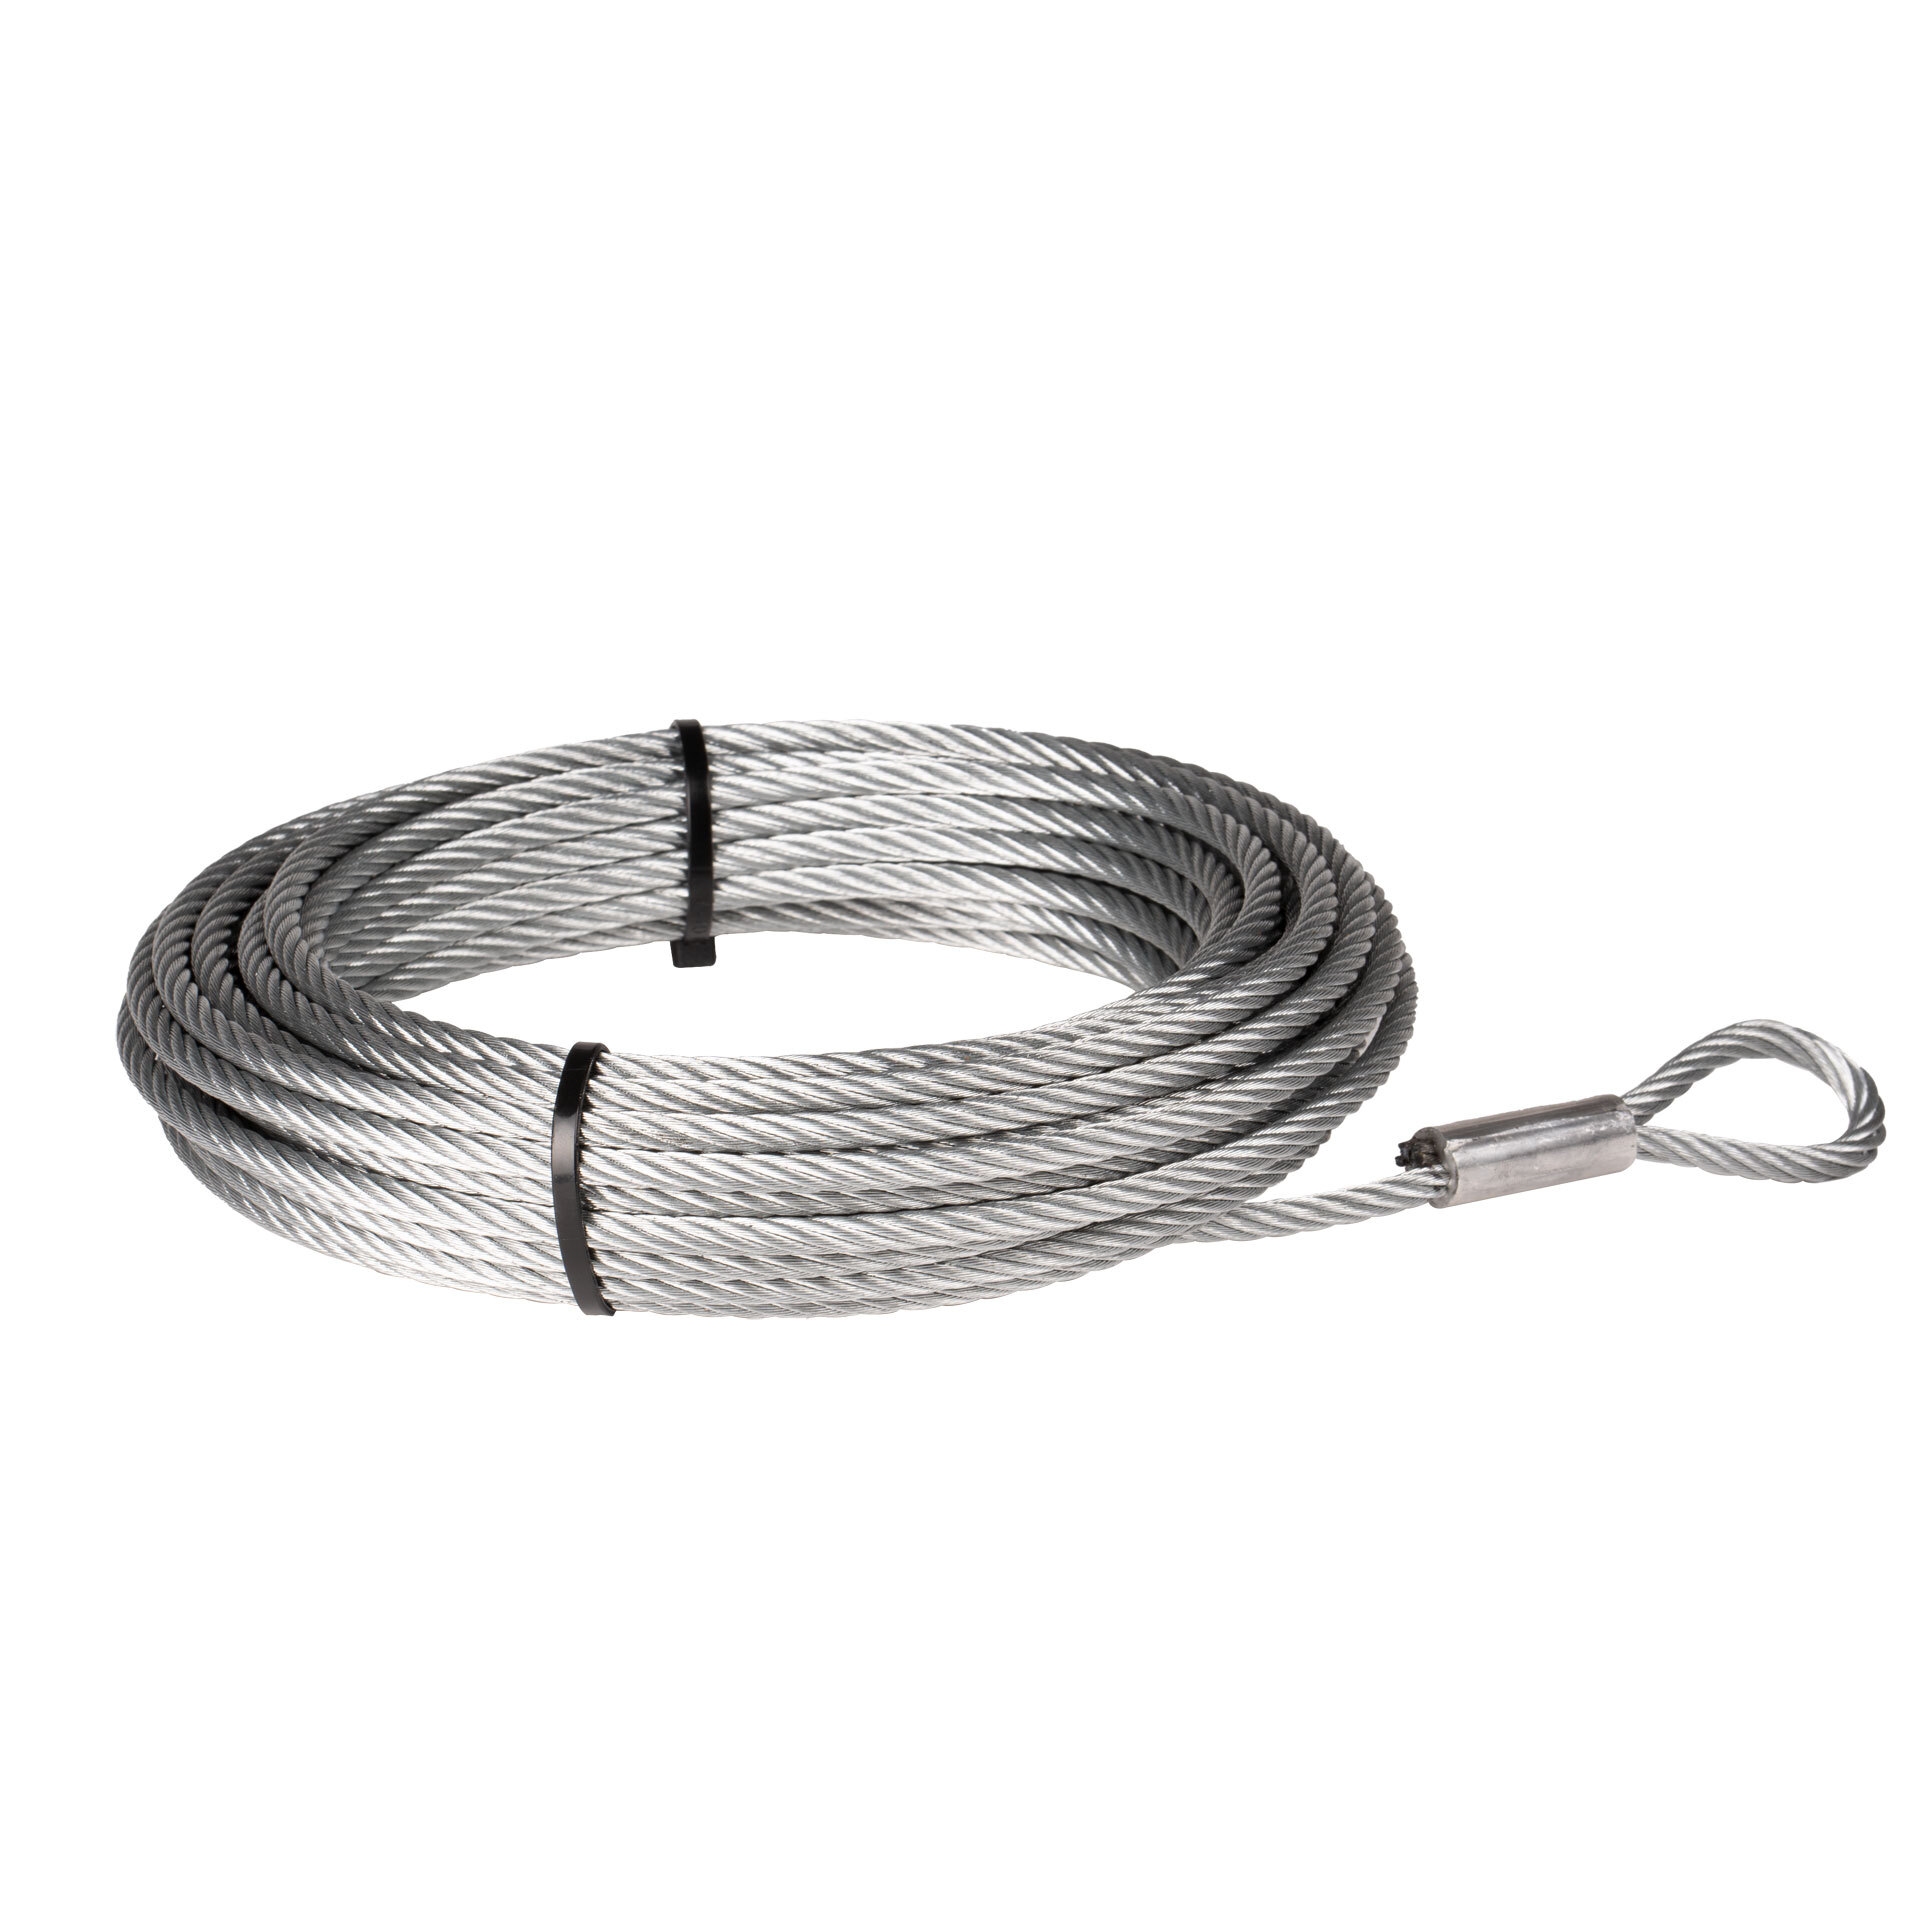 WARN® 4500 lb Wire Rope